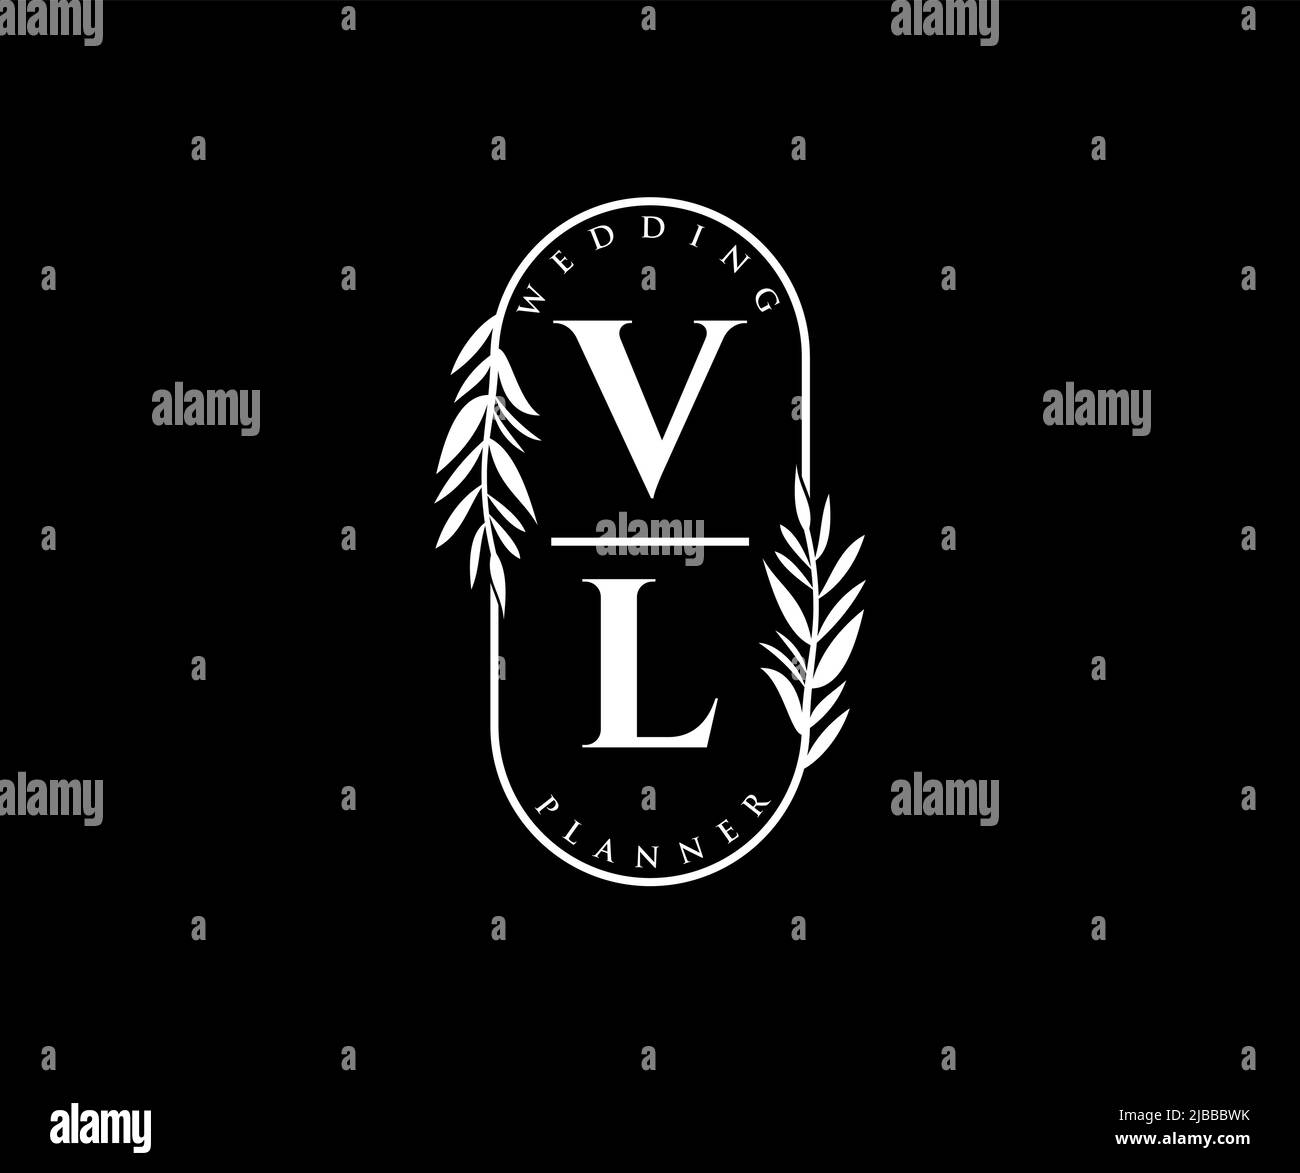 Vl logo with circle rounded negative space design Vector Image